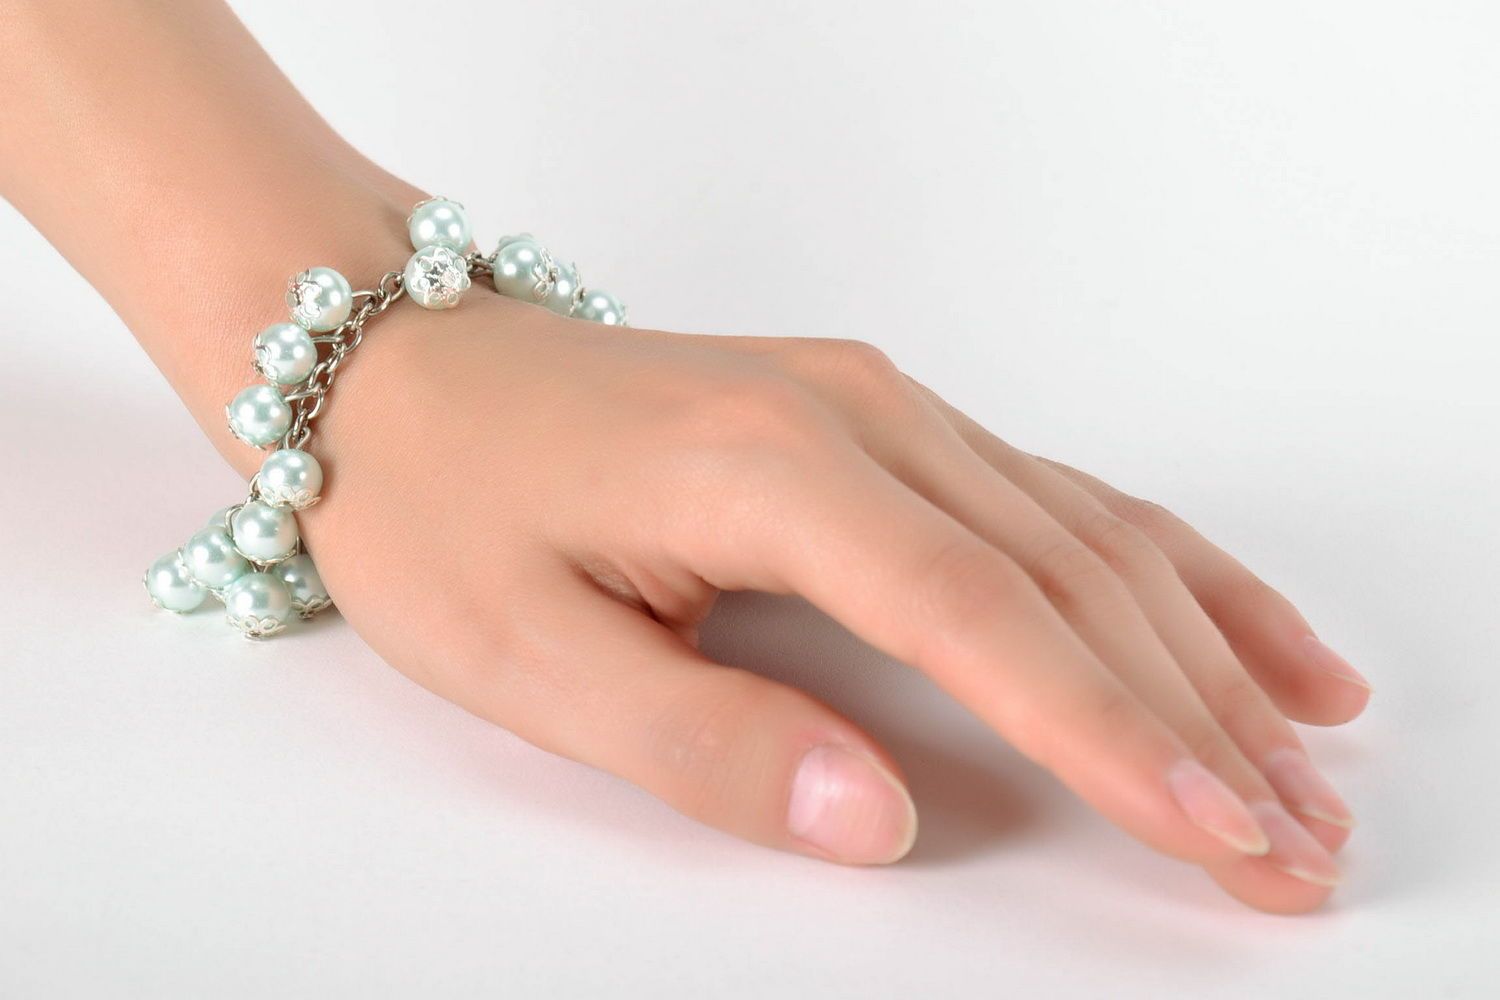 Bracelet made from ceramic pearls photo 5